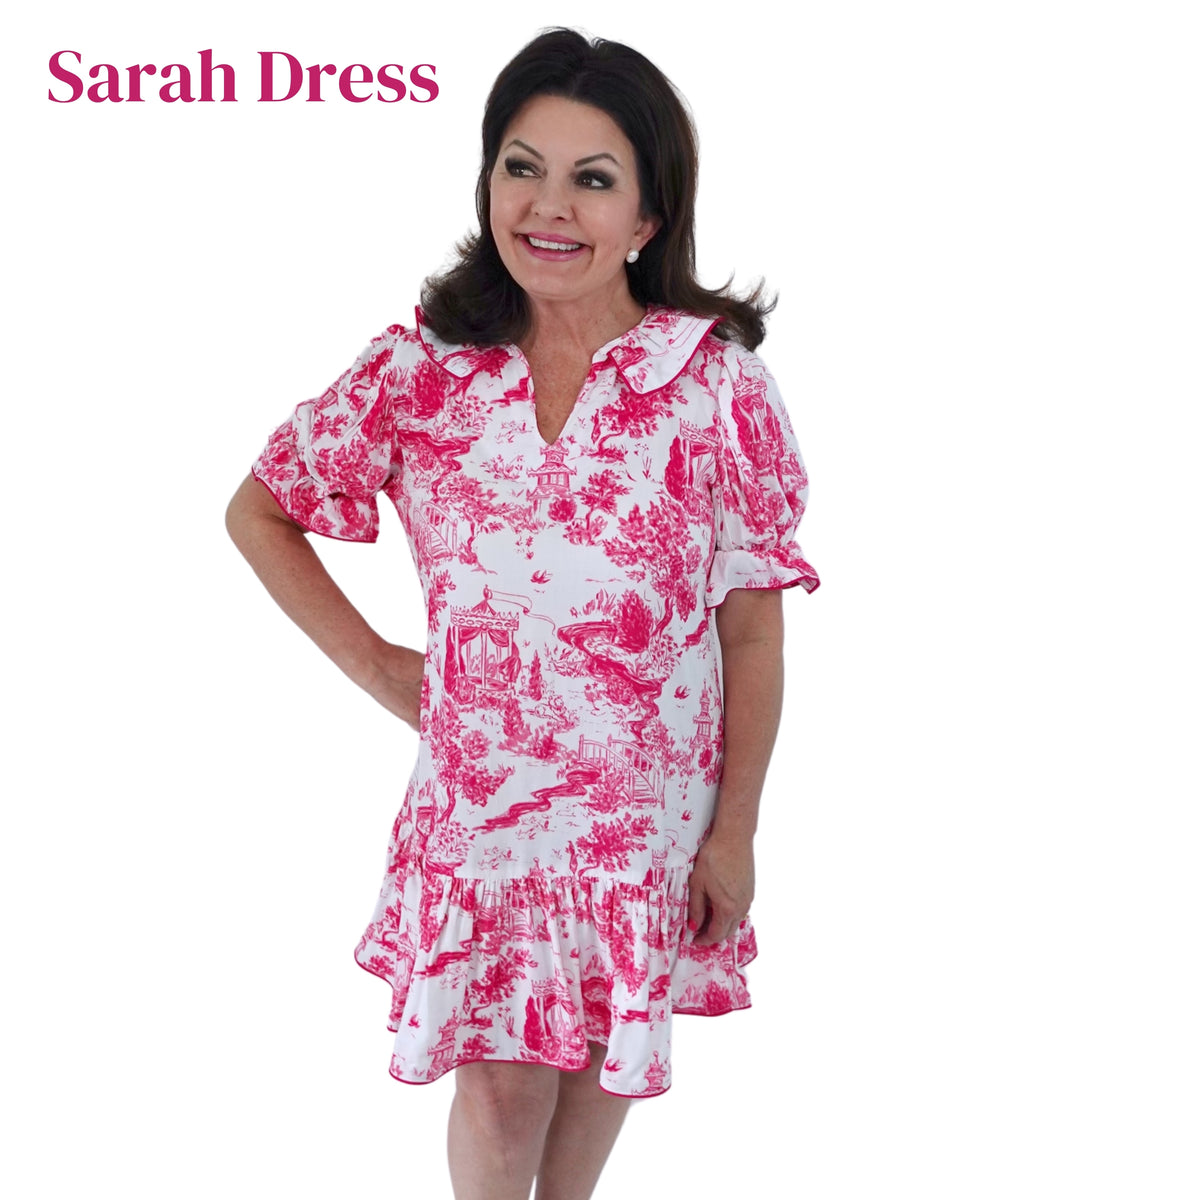 THE SARAH DRESS IN PINK TOILE